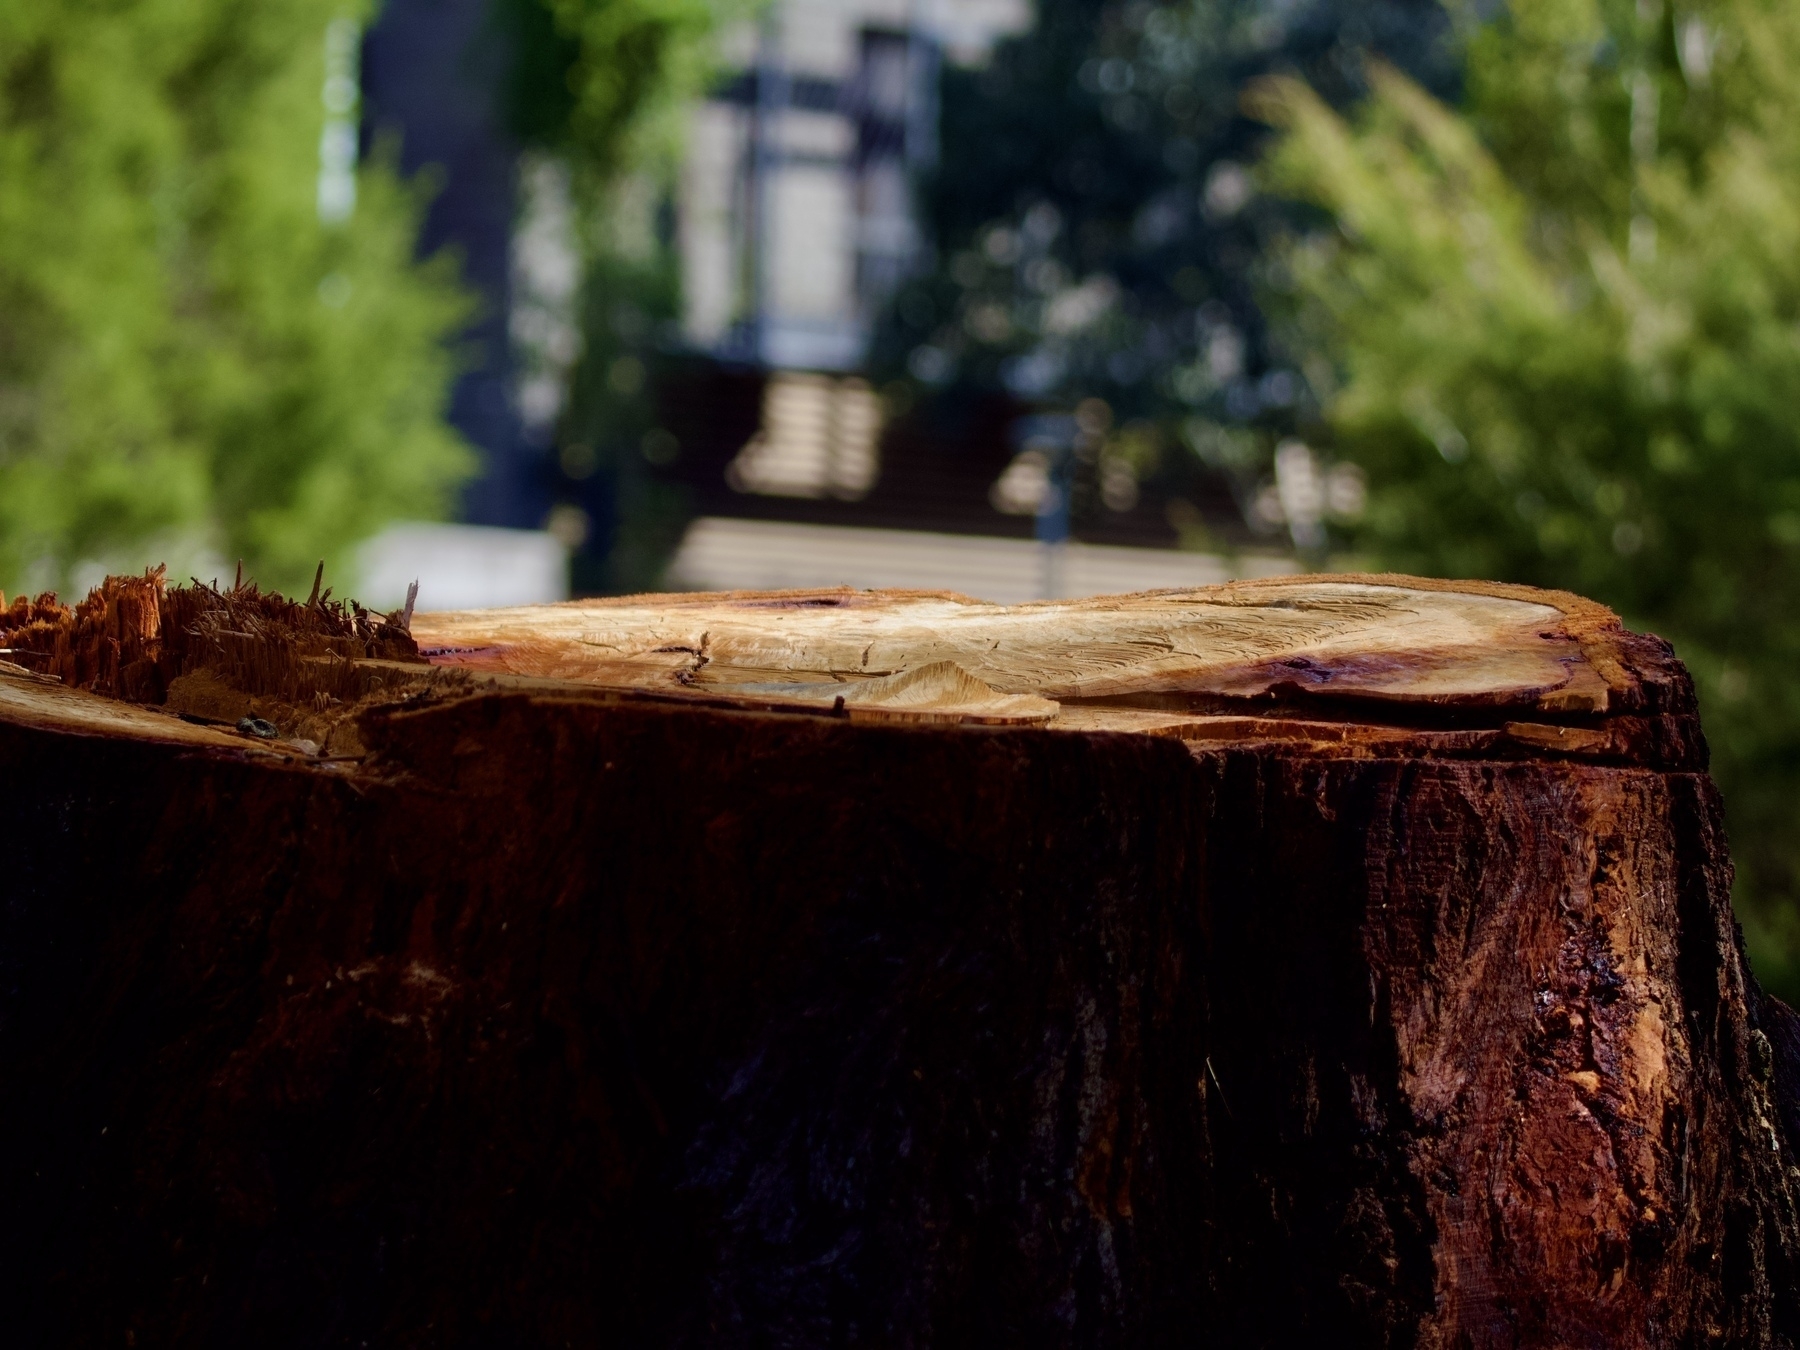 The stump of a freshly-cut tree, with blurred trees in the background